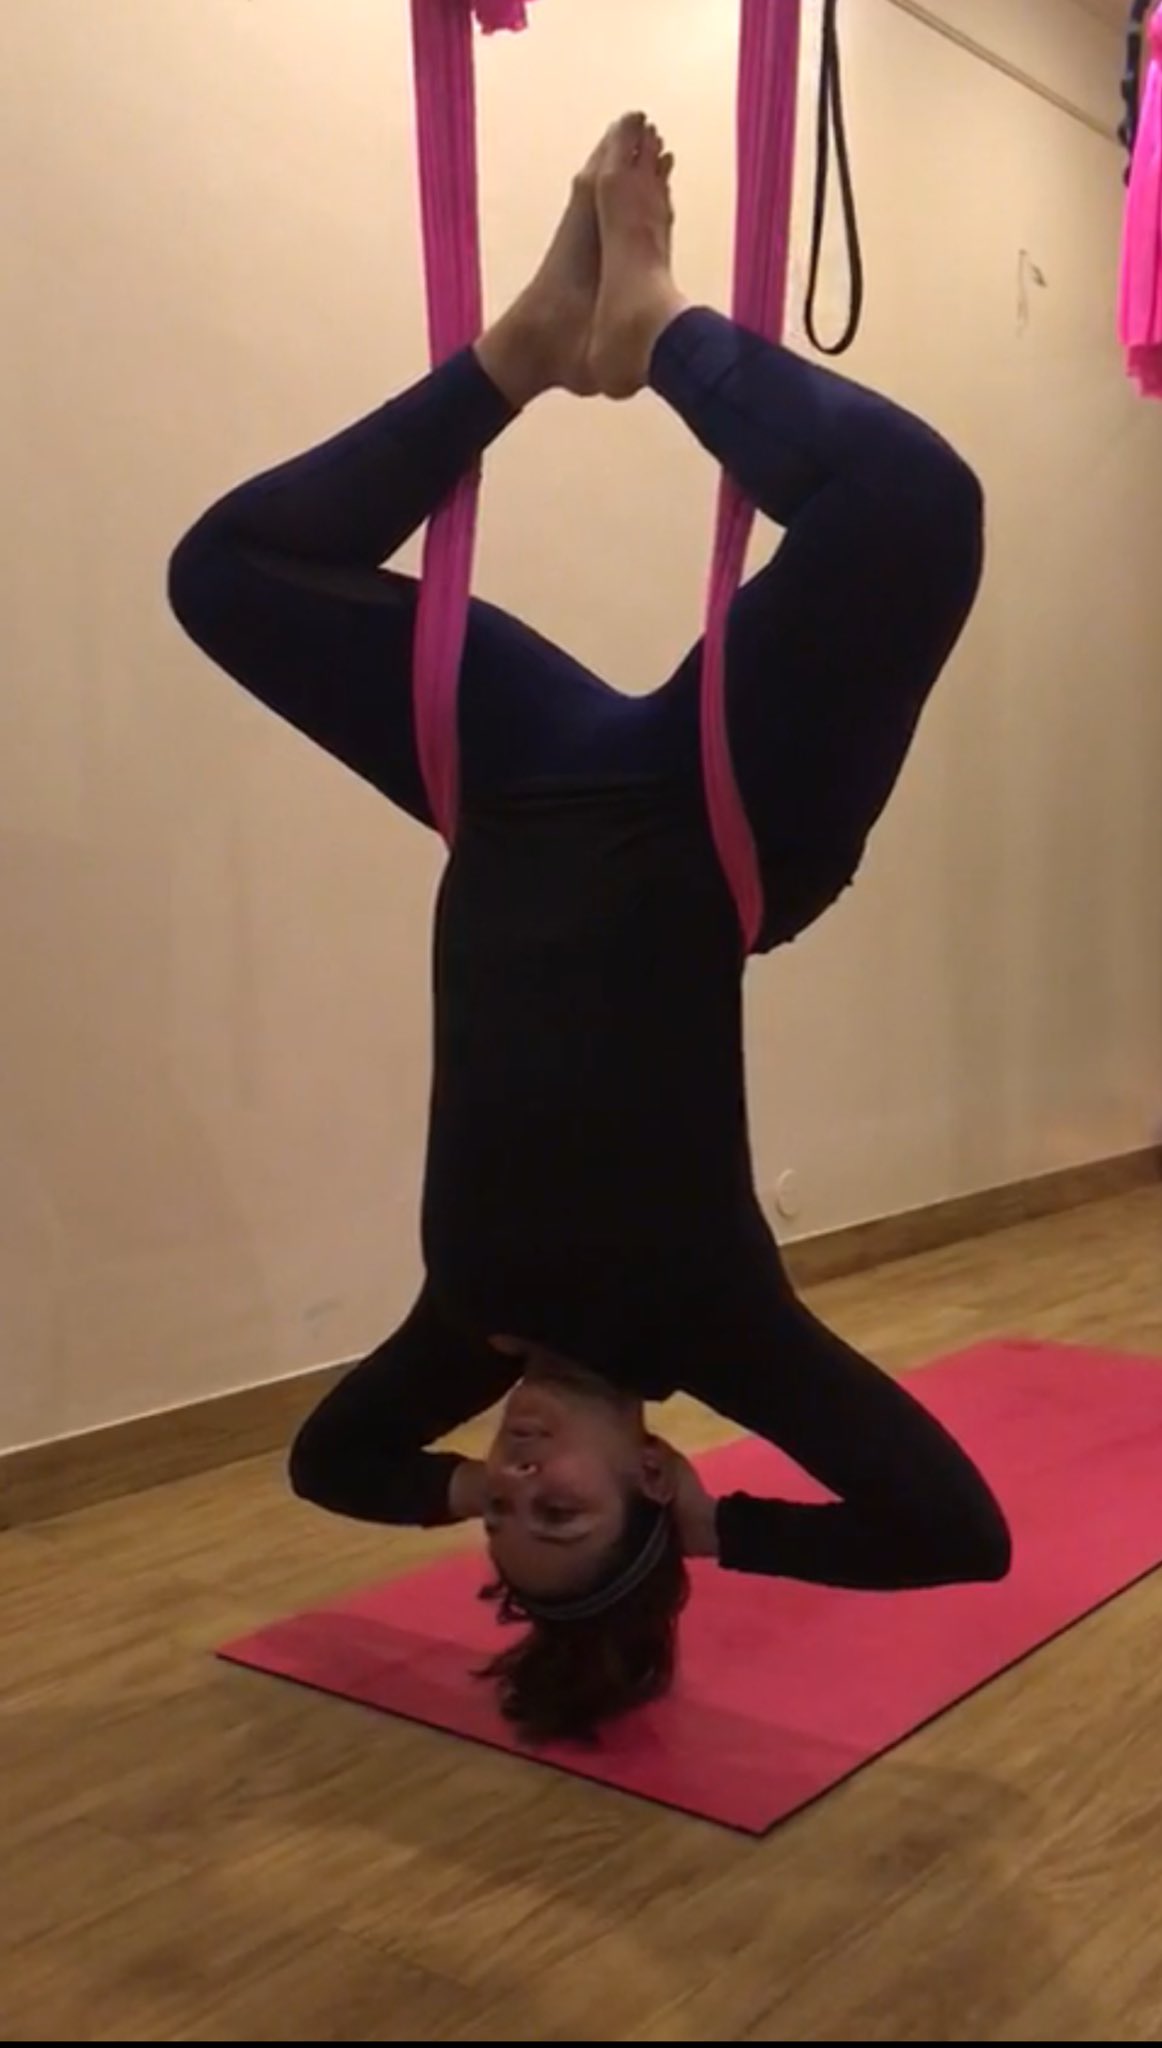 SPIDER MAN POSE Aerial Yoga at Home - Beginner Friendly - YouTube